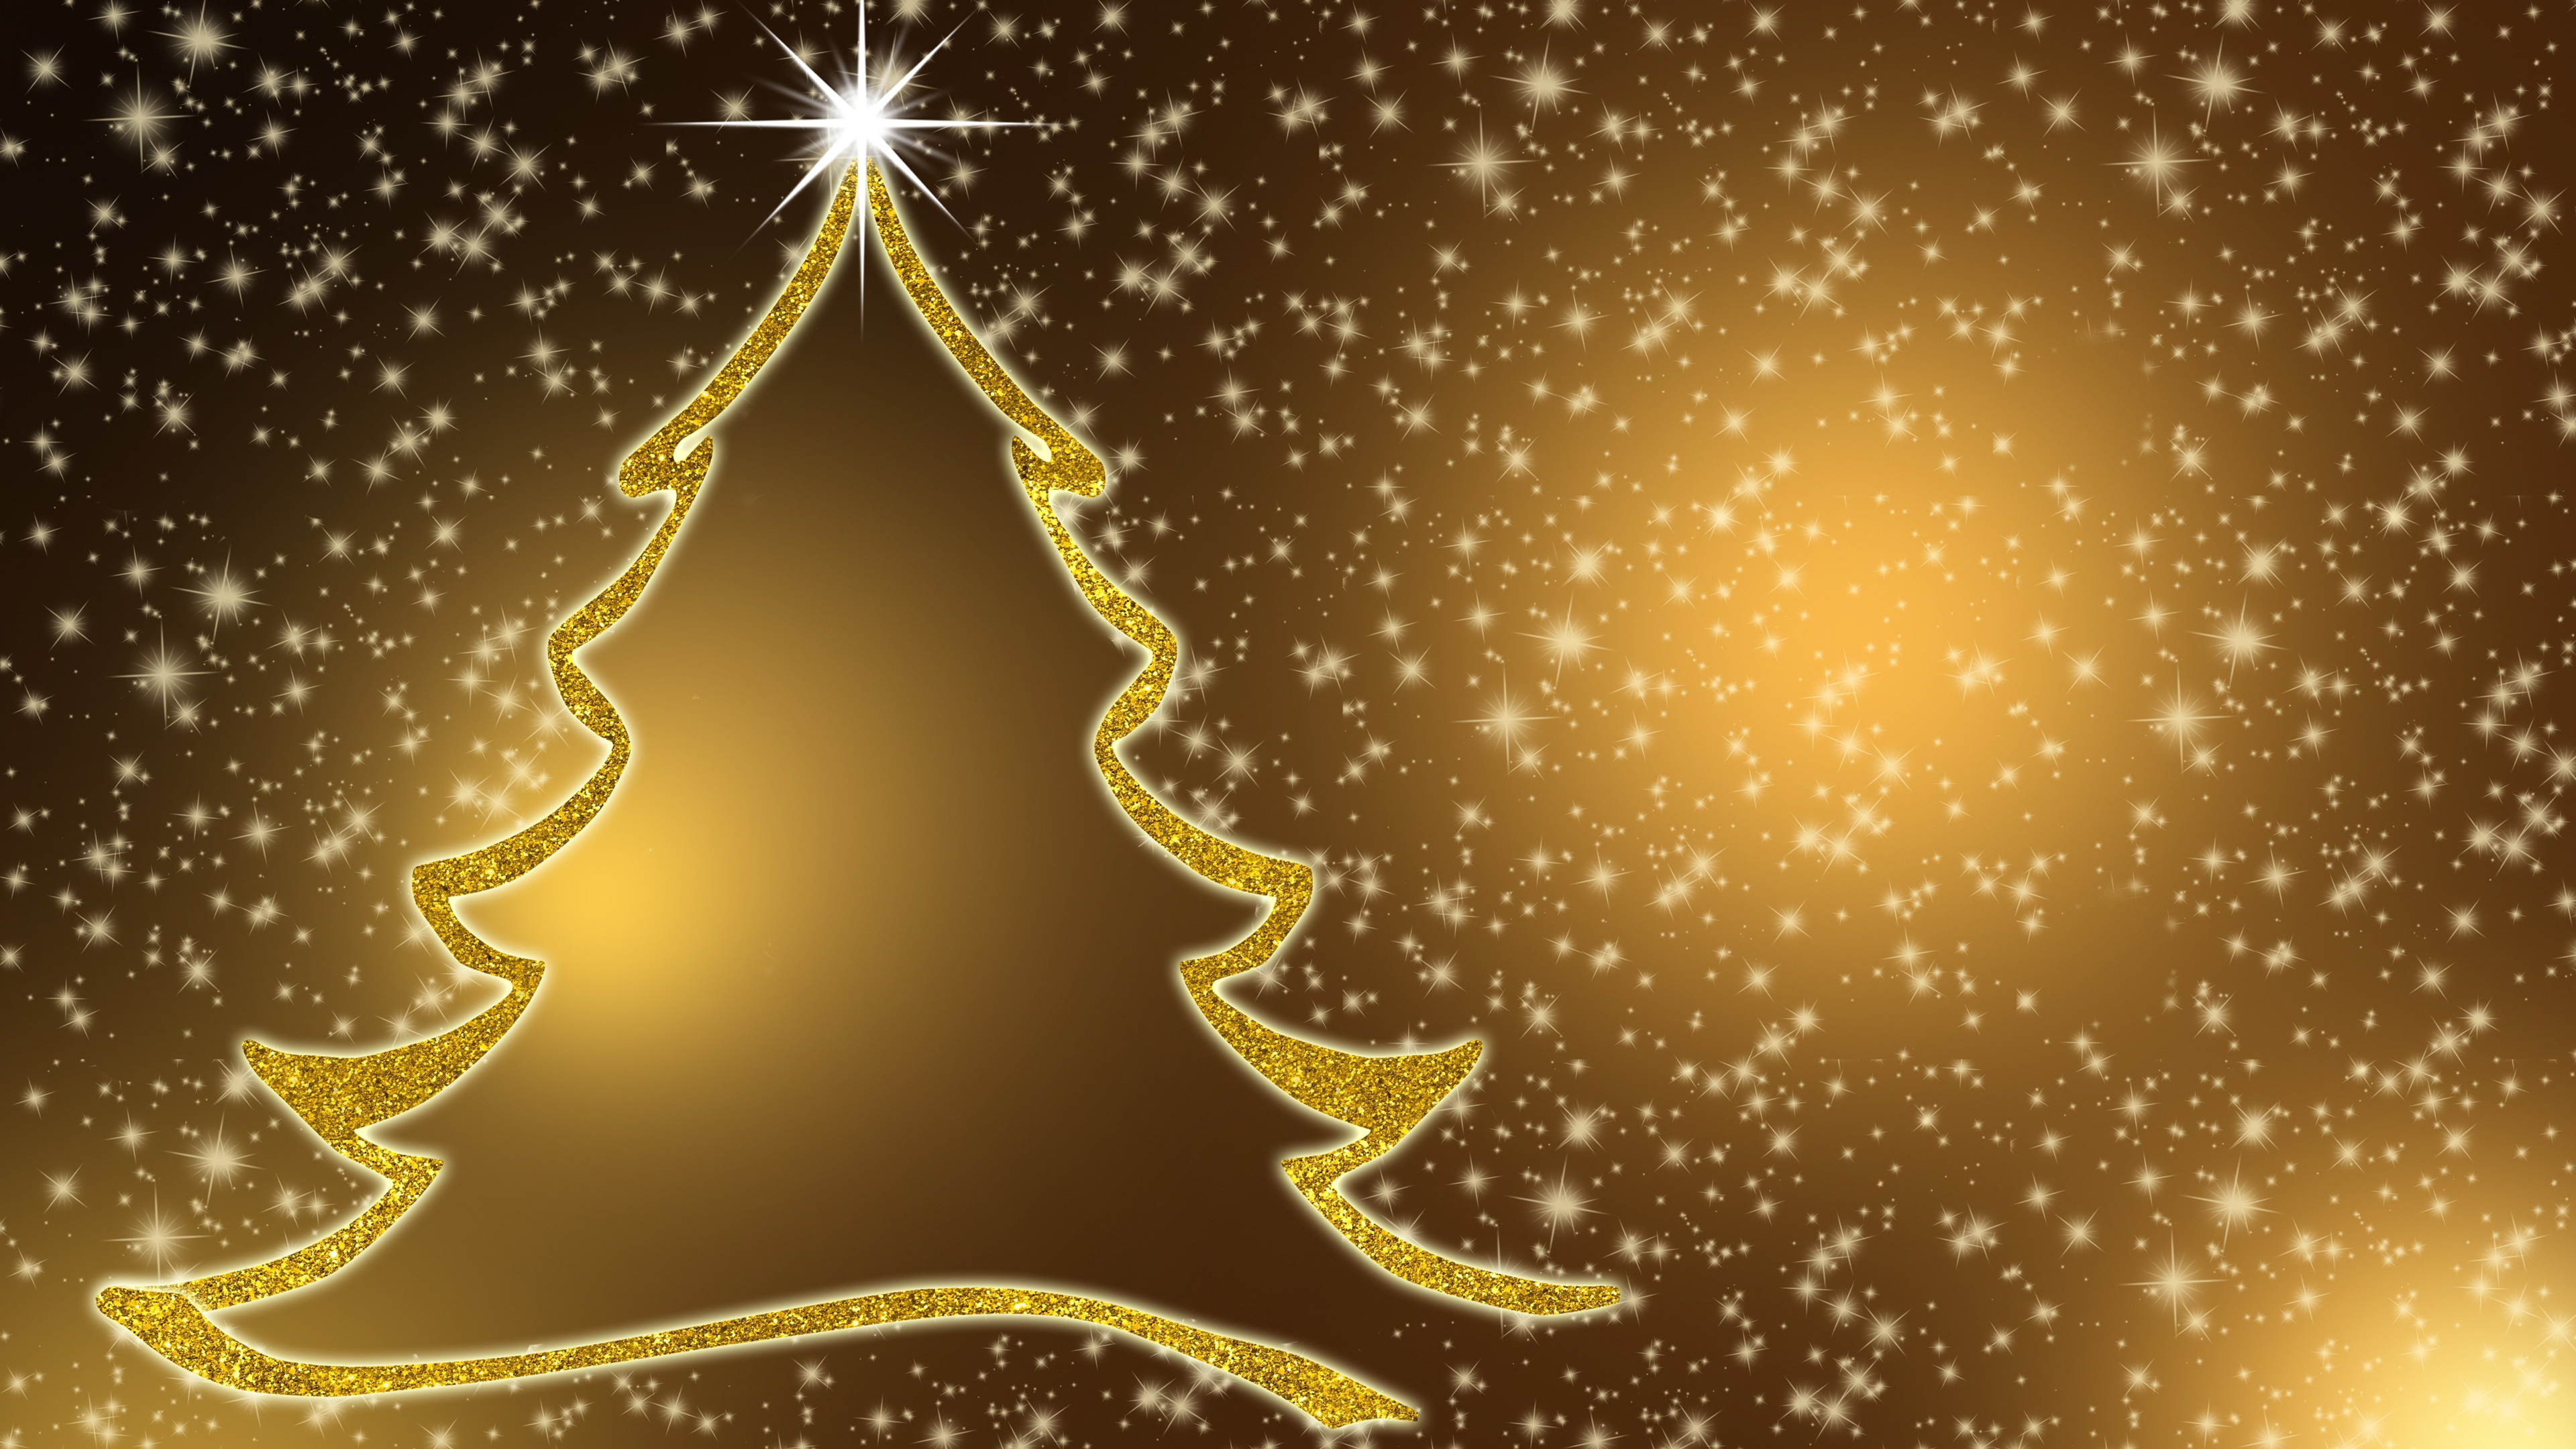 Golden Christmas Tree With Star In Golden Sparkling Wallpaper K HD Christmas Tree